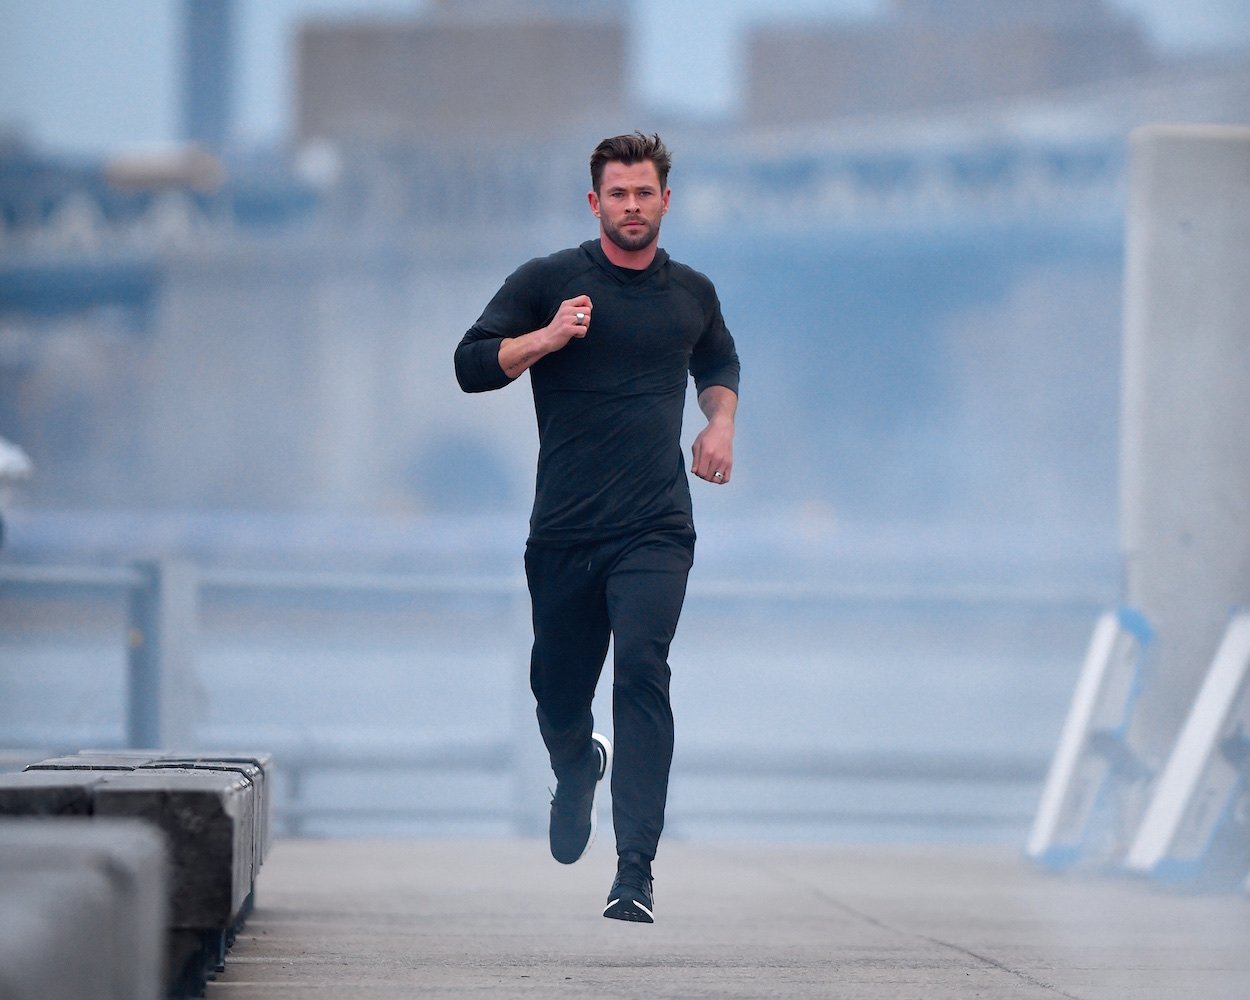 Chris Hemsworth jogs in Brooklyn in 2019. Hemsworth's diet and fitness routine keep him in shape, but his cheat foods in his self-described "80-20" diet are all too common.